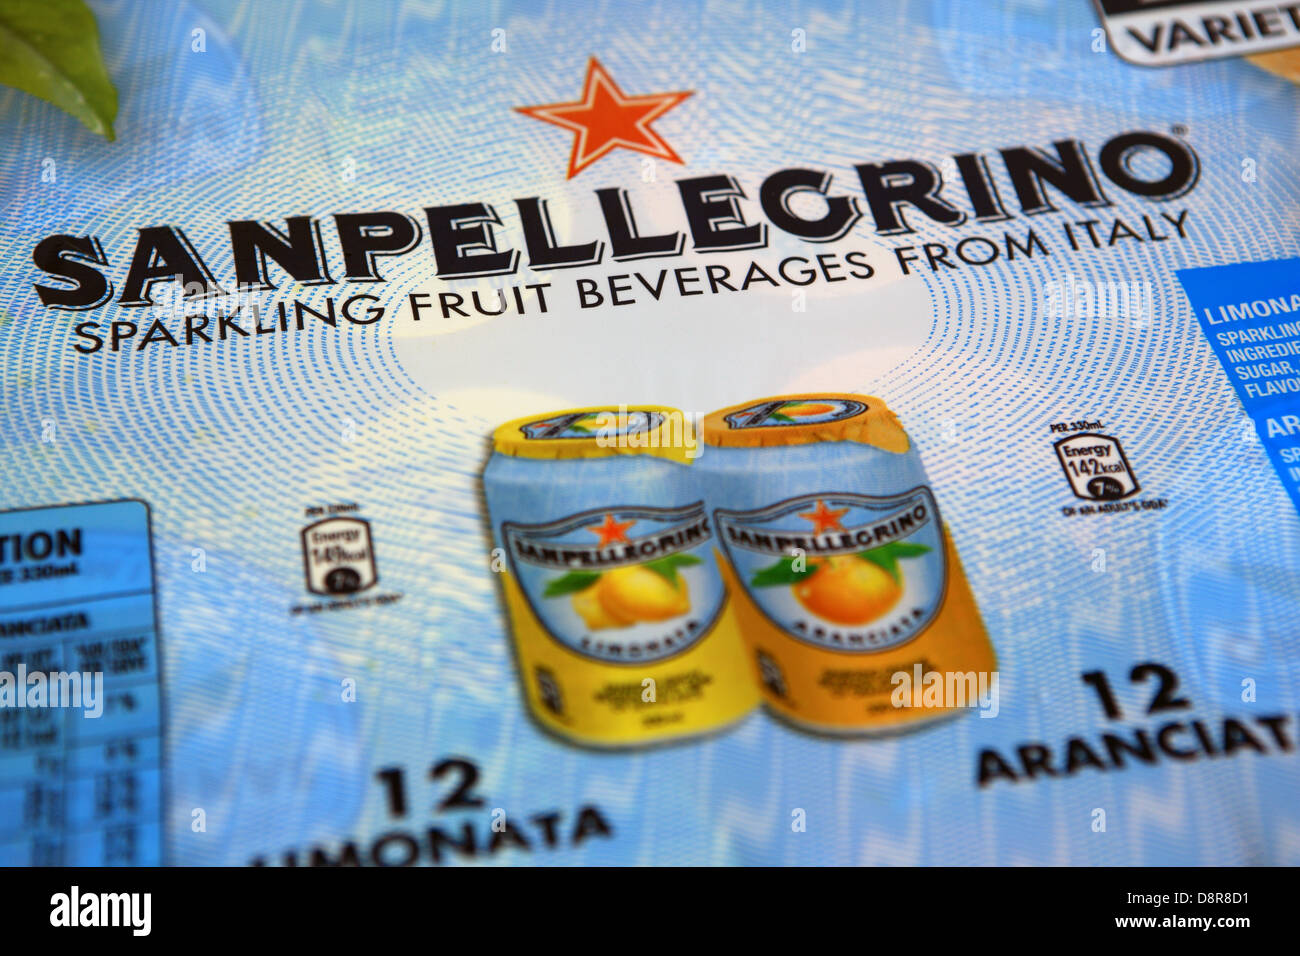 Pack of orange and lemon cans of San Pellegrino sparkling drinks form Italy Stock Photo